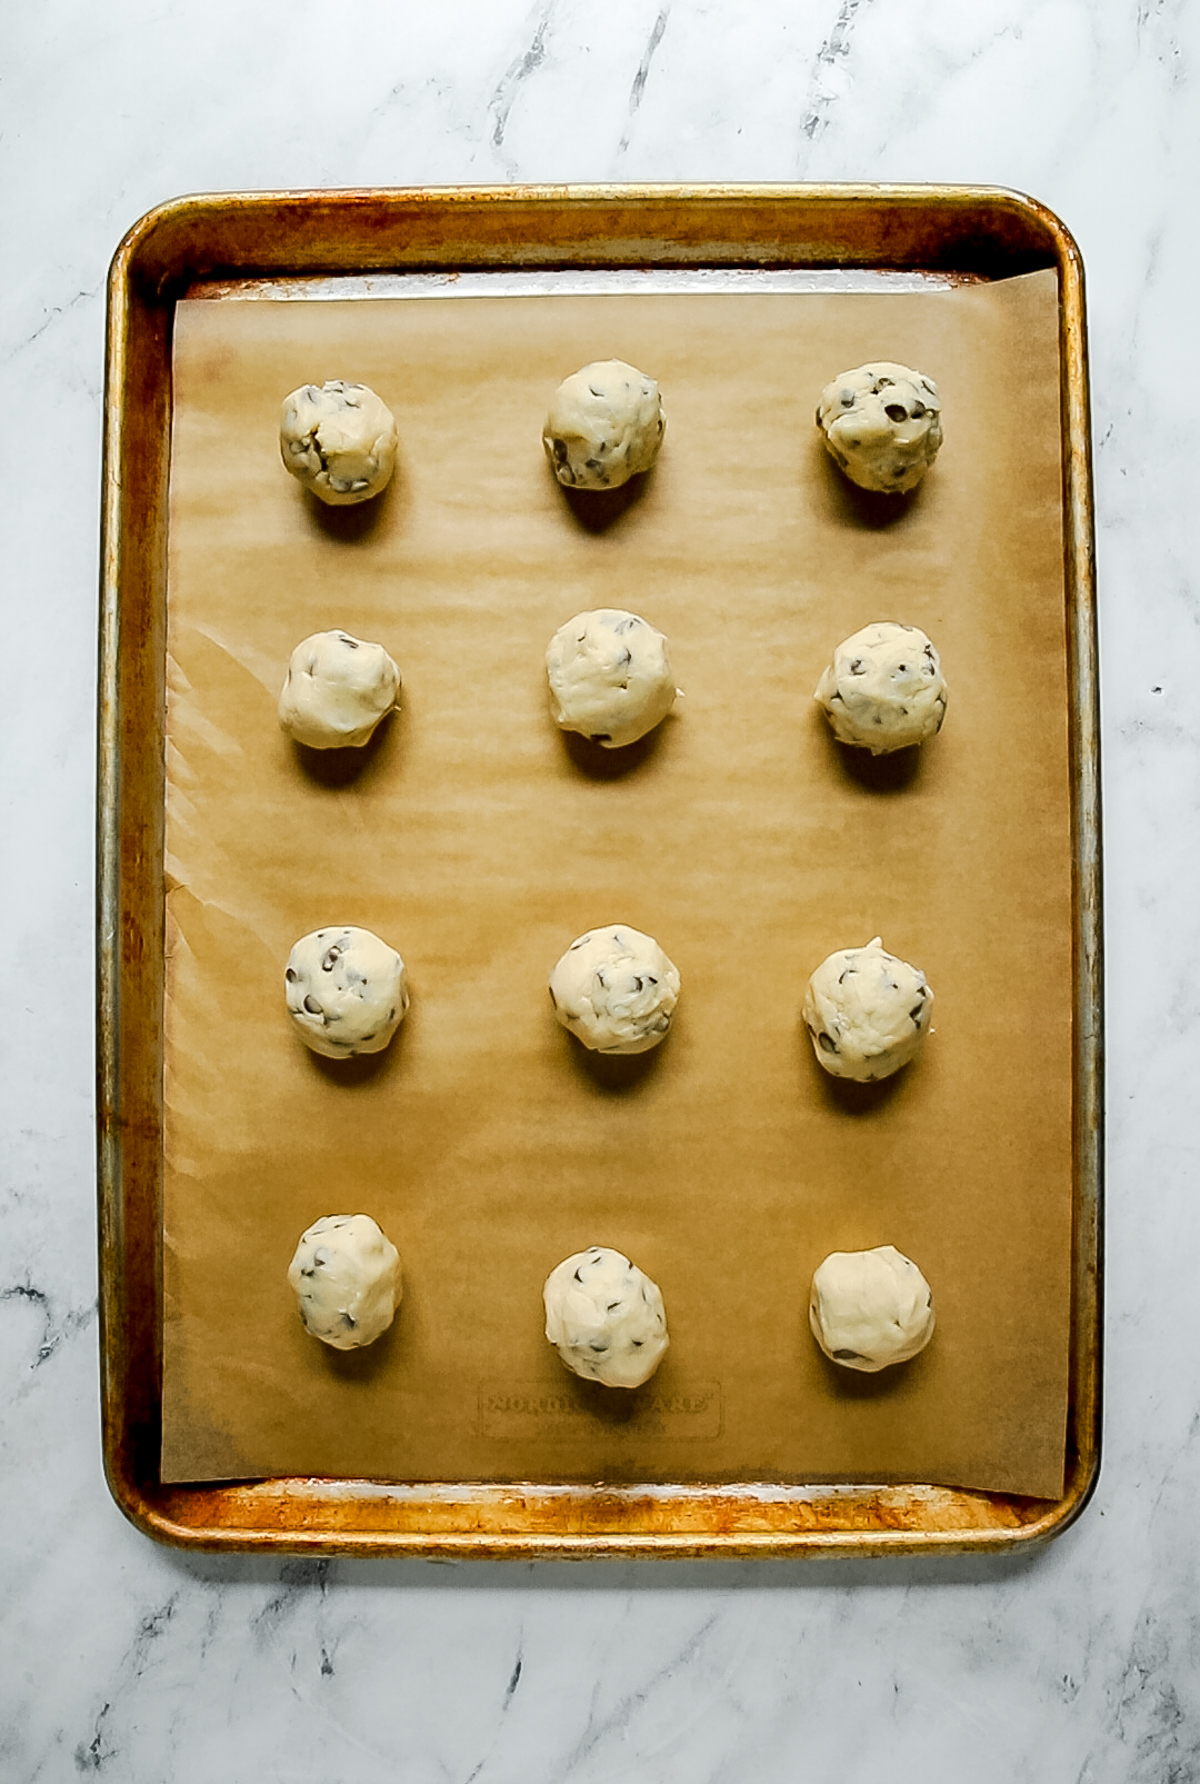 unbaked chocolate chip snowball cookie dough balls on baking sheet with parchment paper